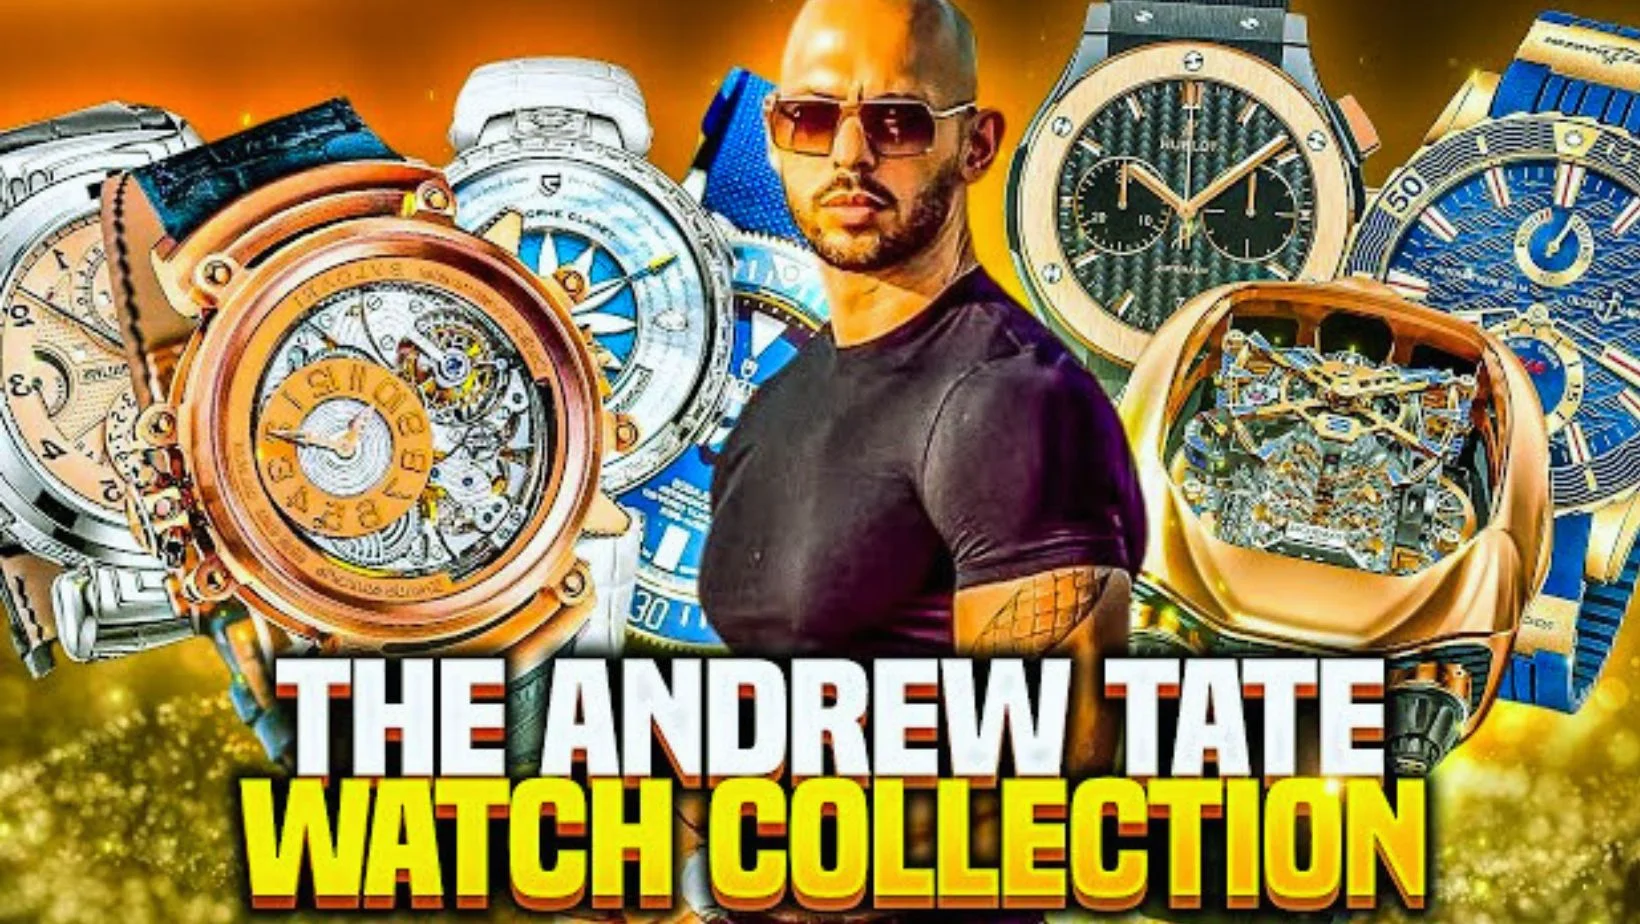 Inside Andrew Tate Watch Collection That Includes A Million-Dollar Watch